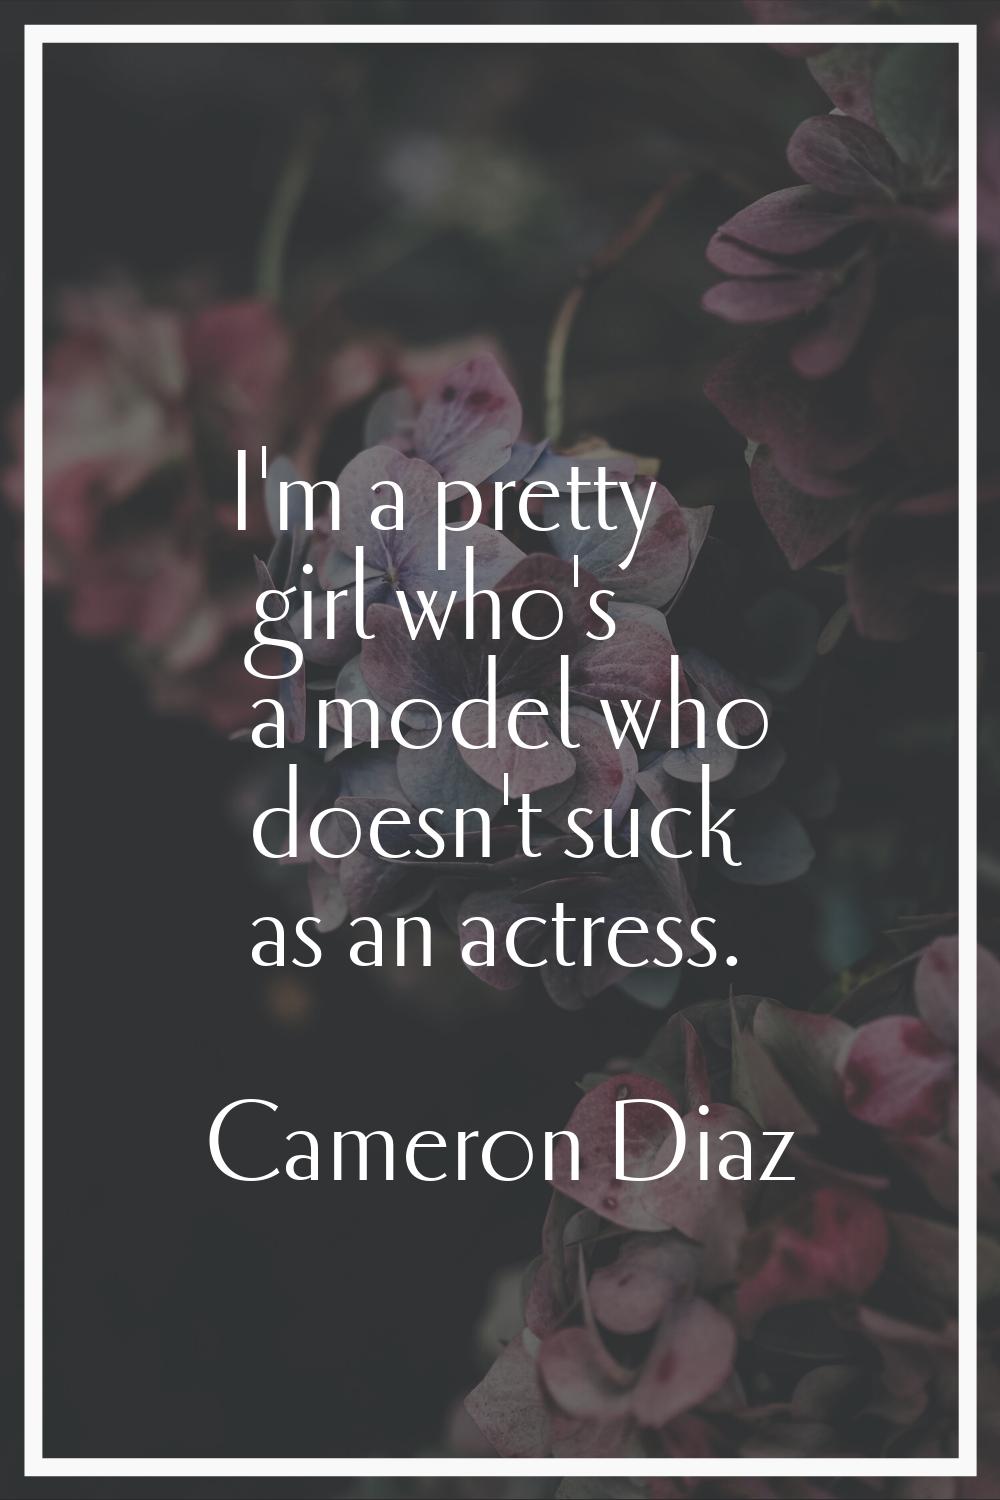 I'm a pretty girl who's a model who doesn't suck as an actress.